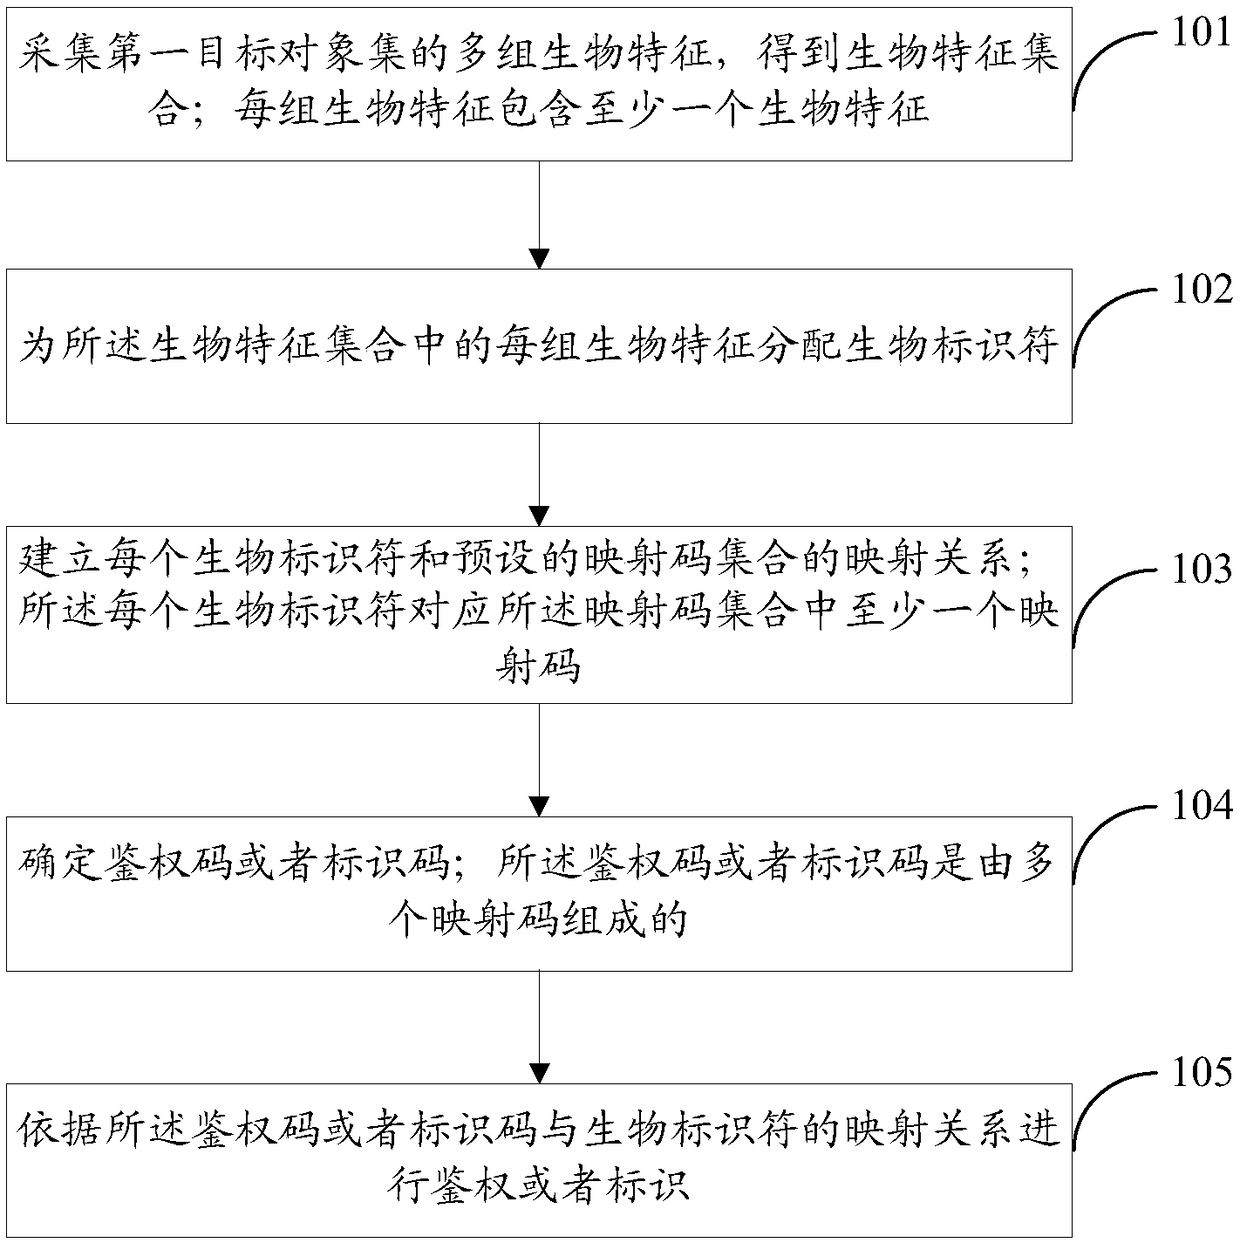 Multi-biological feature authentication or identification-based method and system